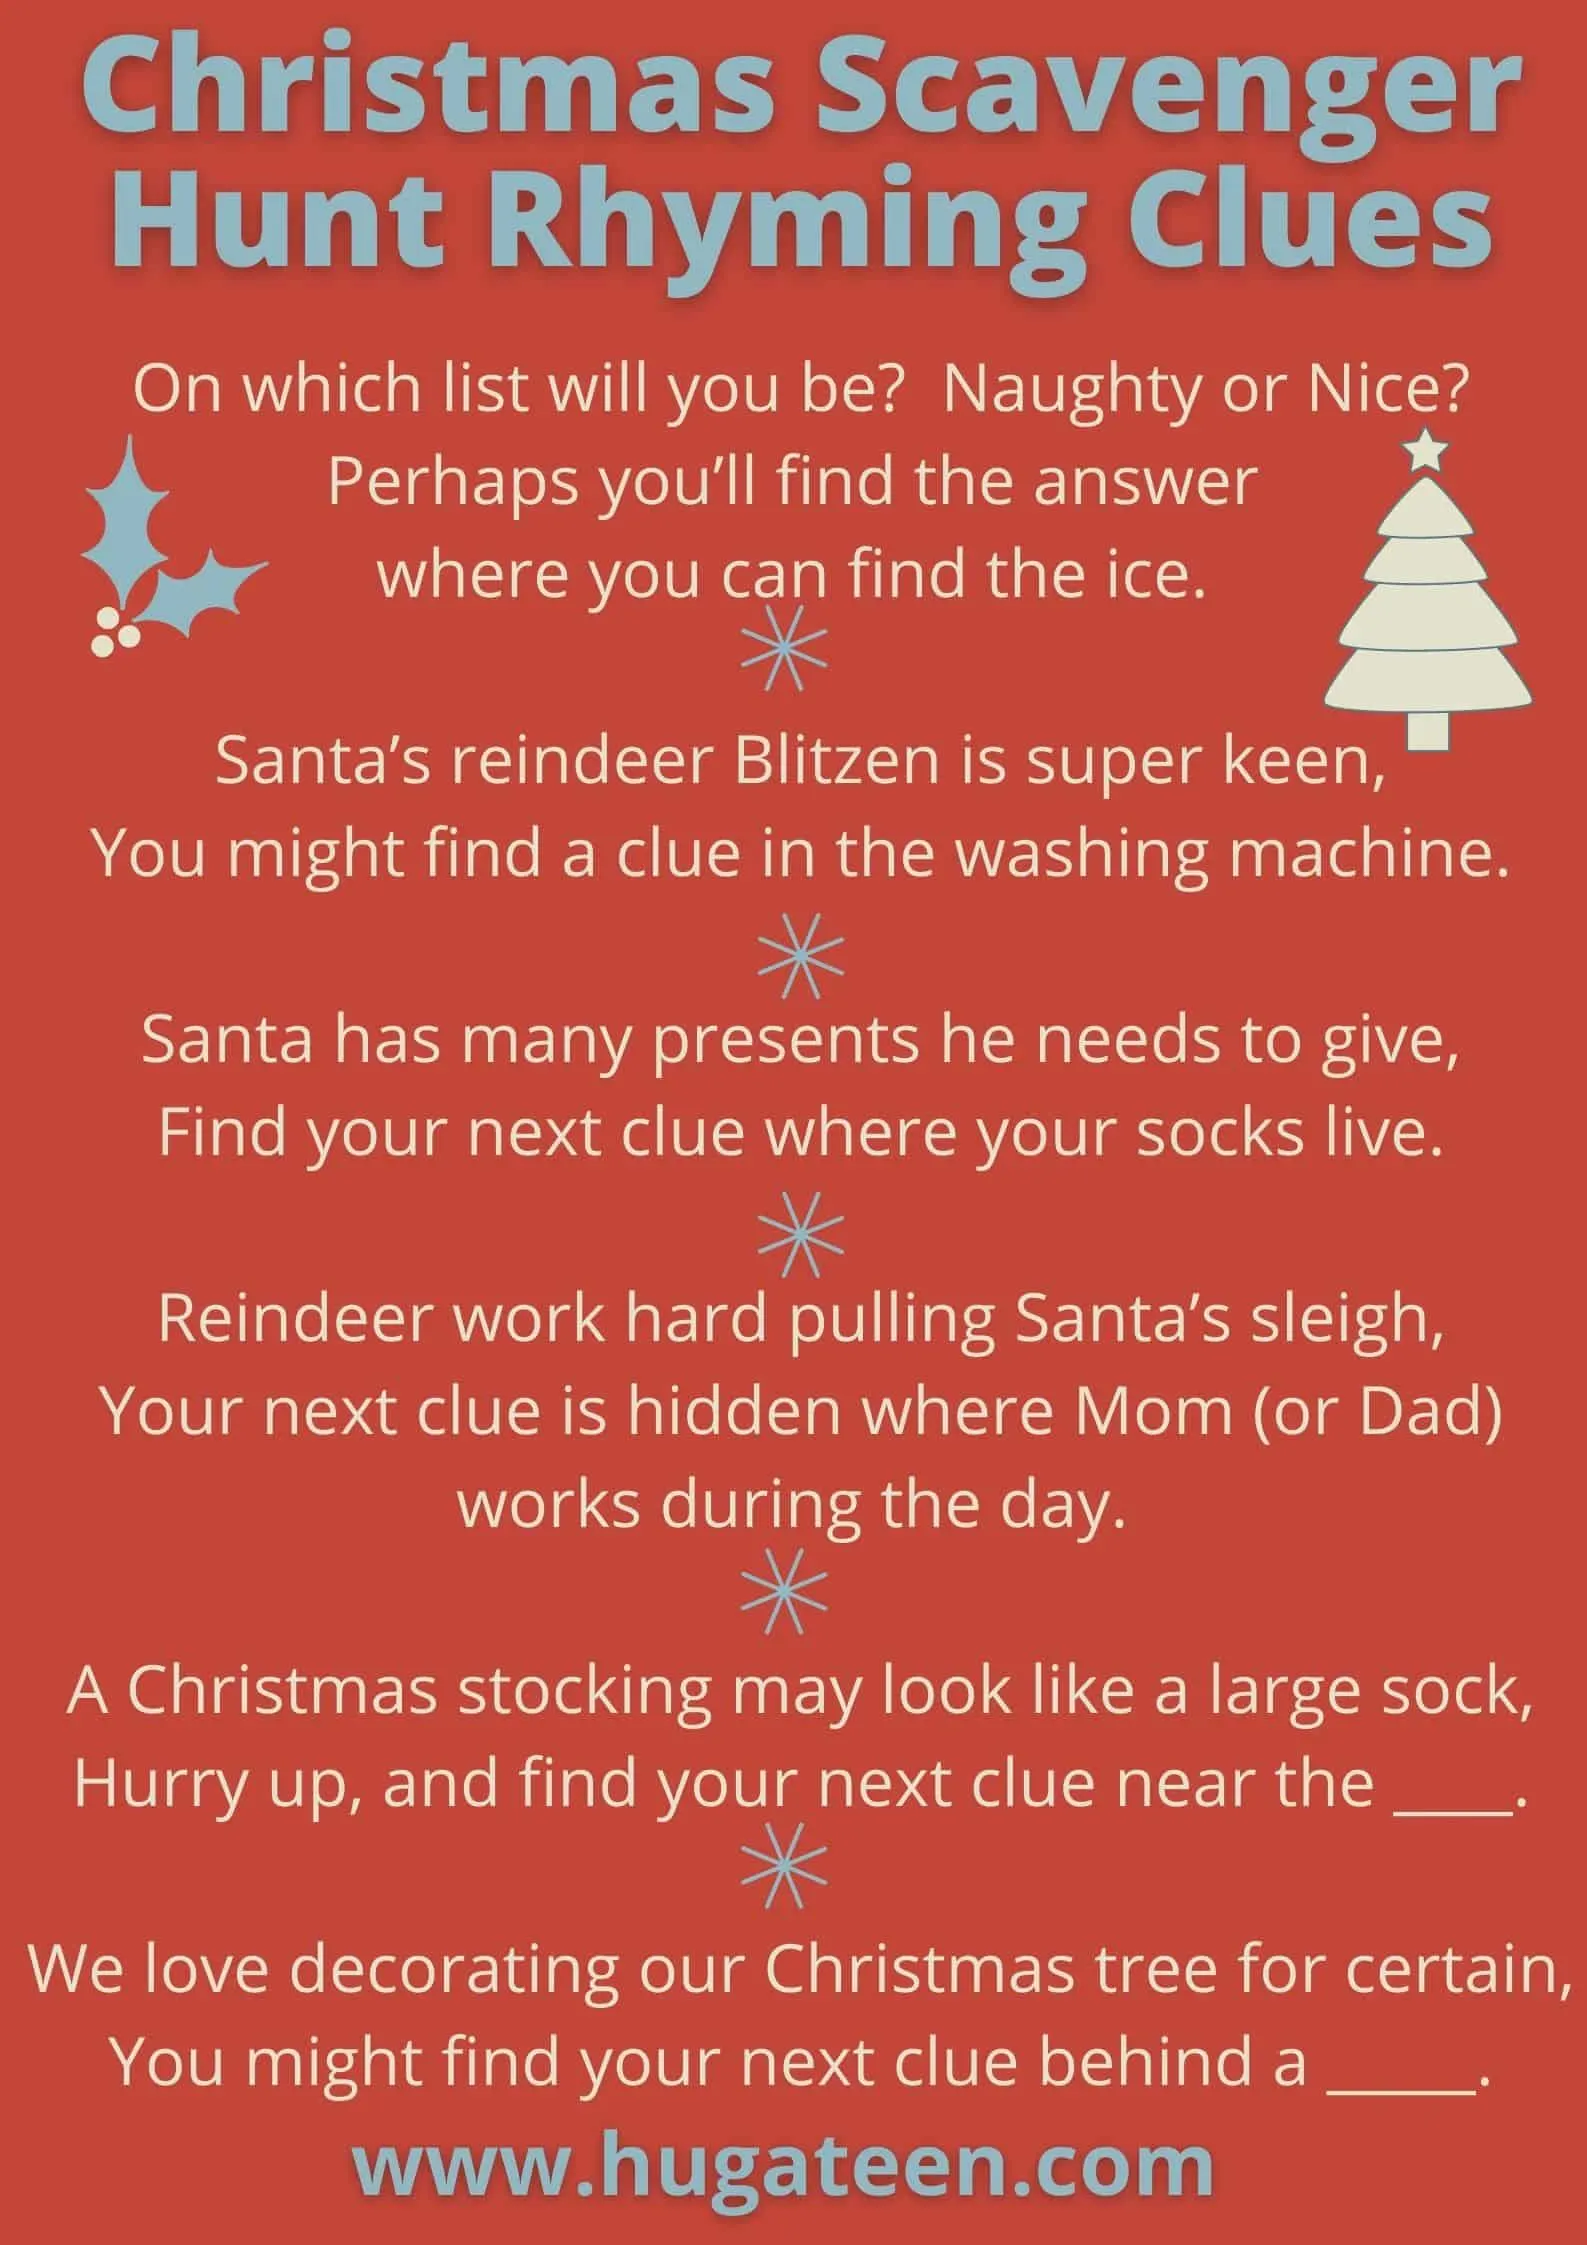 Christmas Scavenger Hunt Games & Clues (for Kids & Adults!)